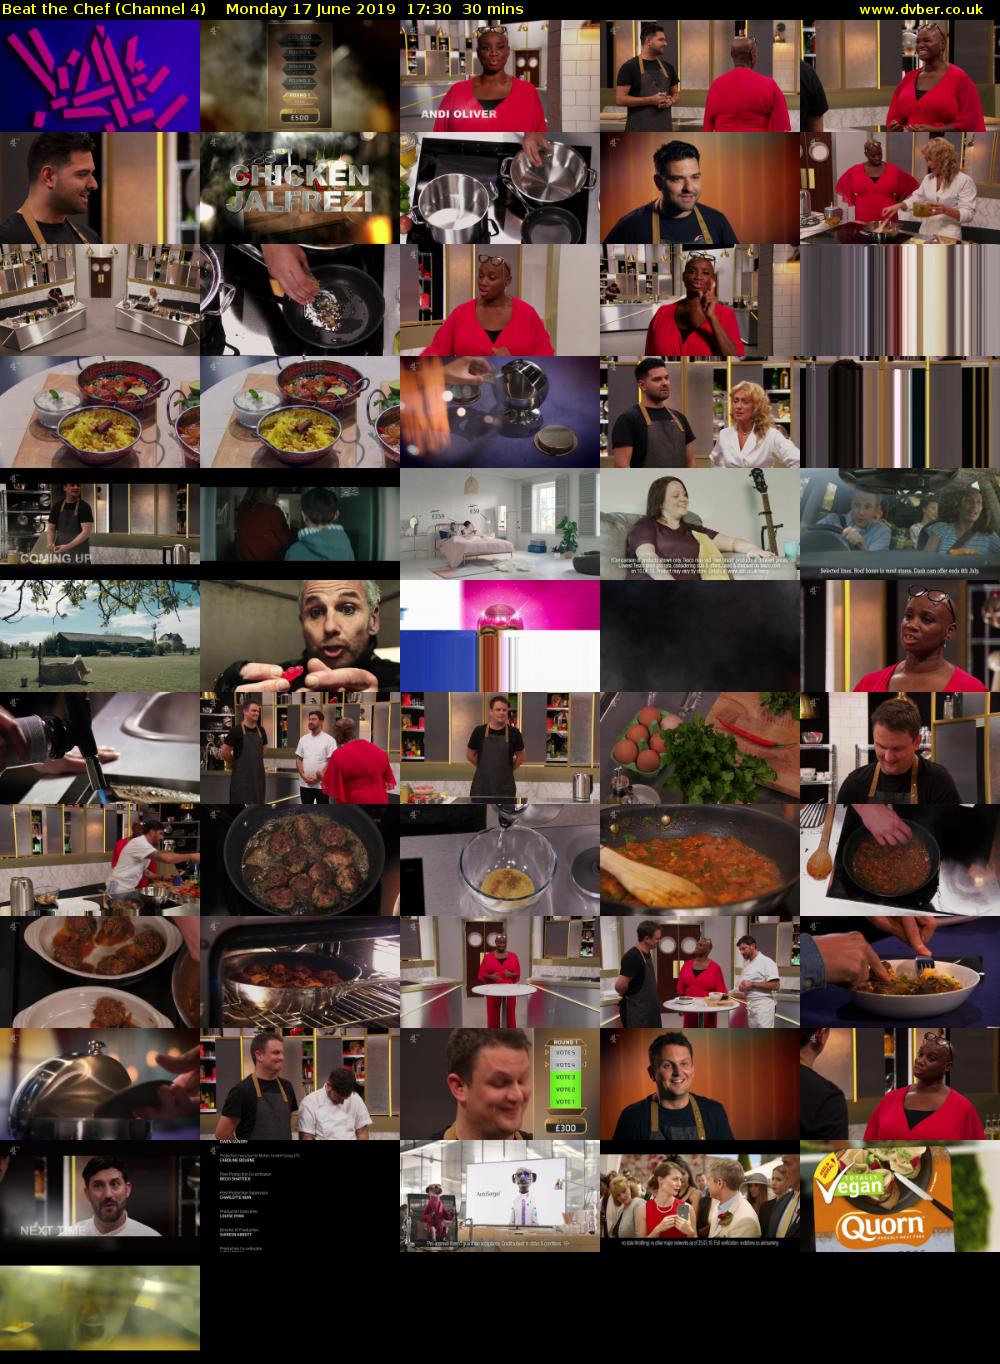 Beat the Chef (Channel 4) Monday 17 June 2019 17:30 - 18:00